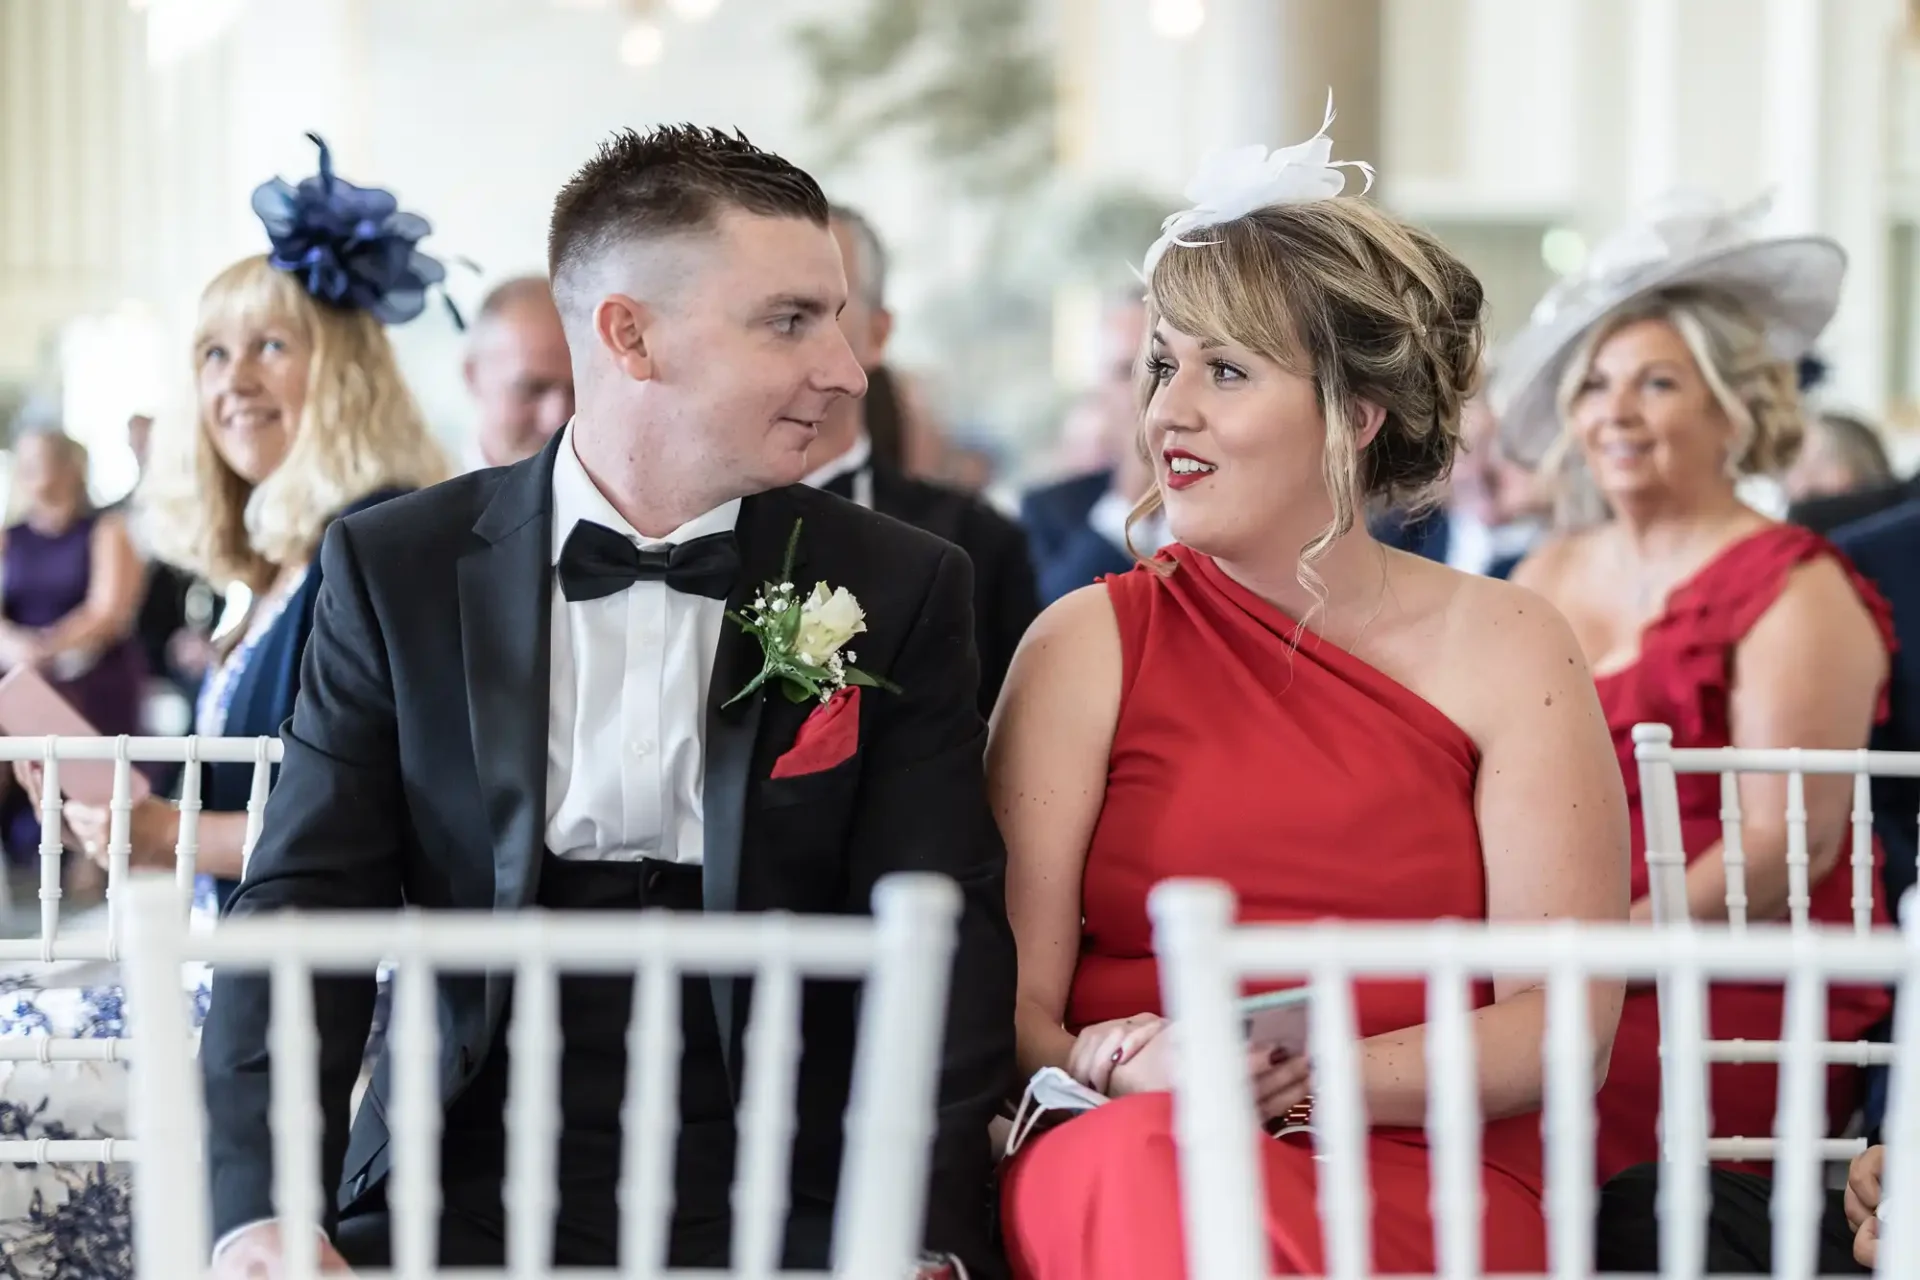 A couple dressed in formal wear sitting at a wedding ceremony, the man in a black tuxedo and woman in a red dress, both looking at each other smiling.